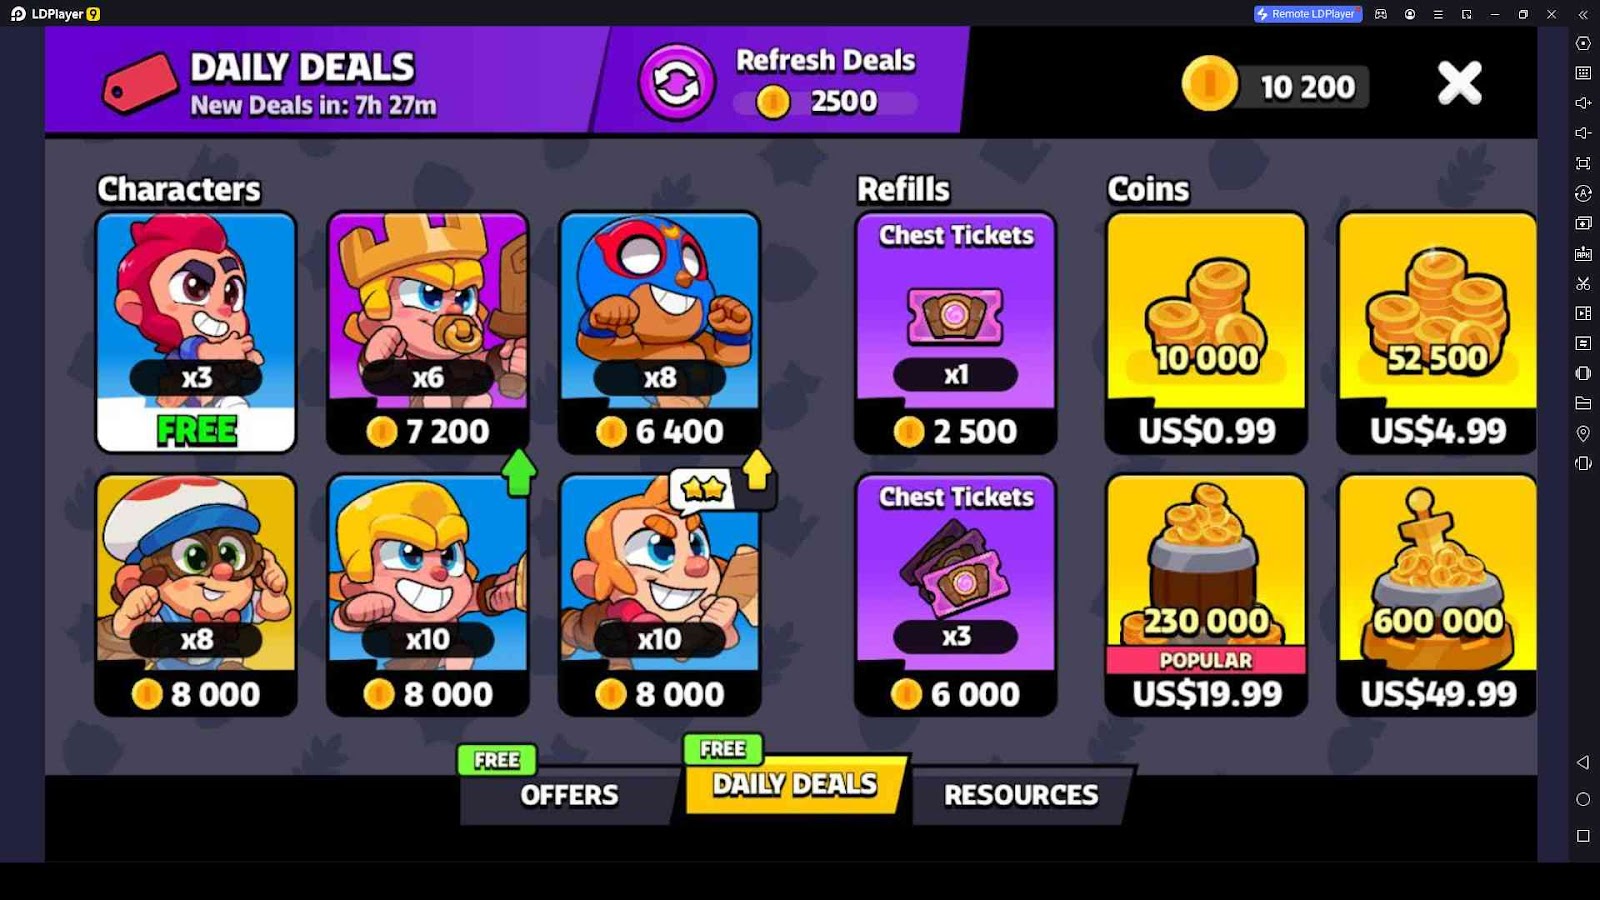 Buy Gold from the In-Game Shop